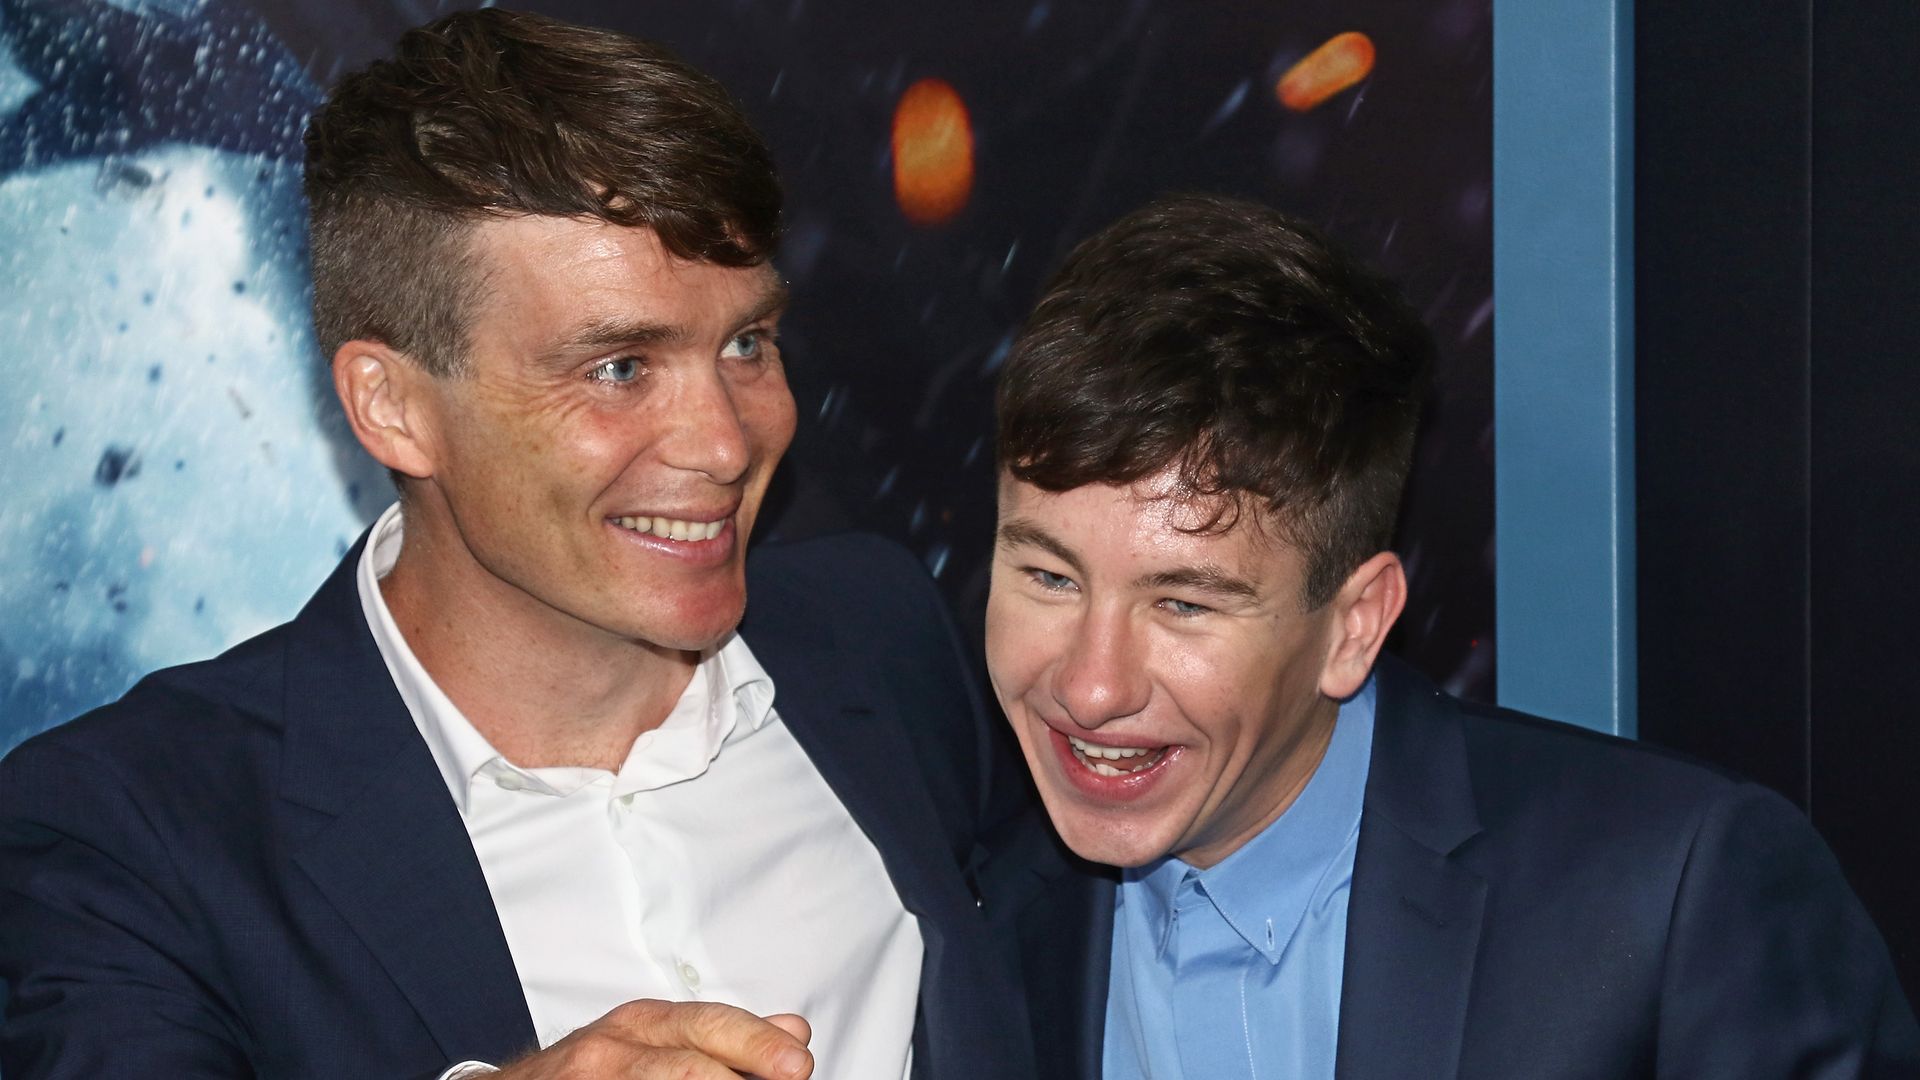 Actors Cillian Murphy and Barry Keoghan attend the "DUNKIRK" New York premiere at AMC Lincoln Square IMAX on July 18, 2017 in New York City